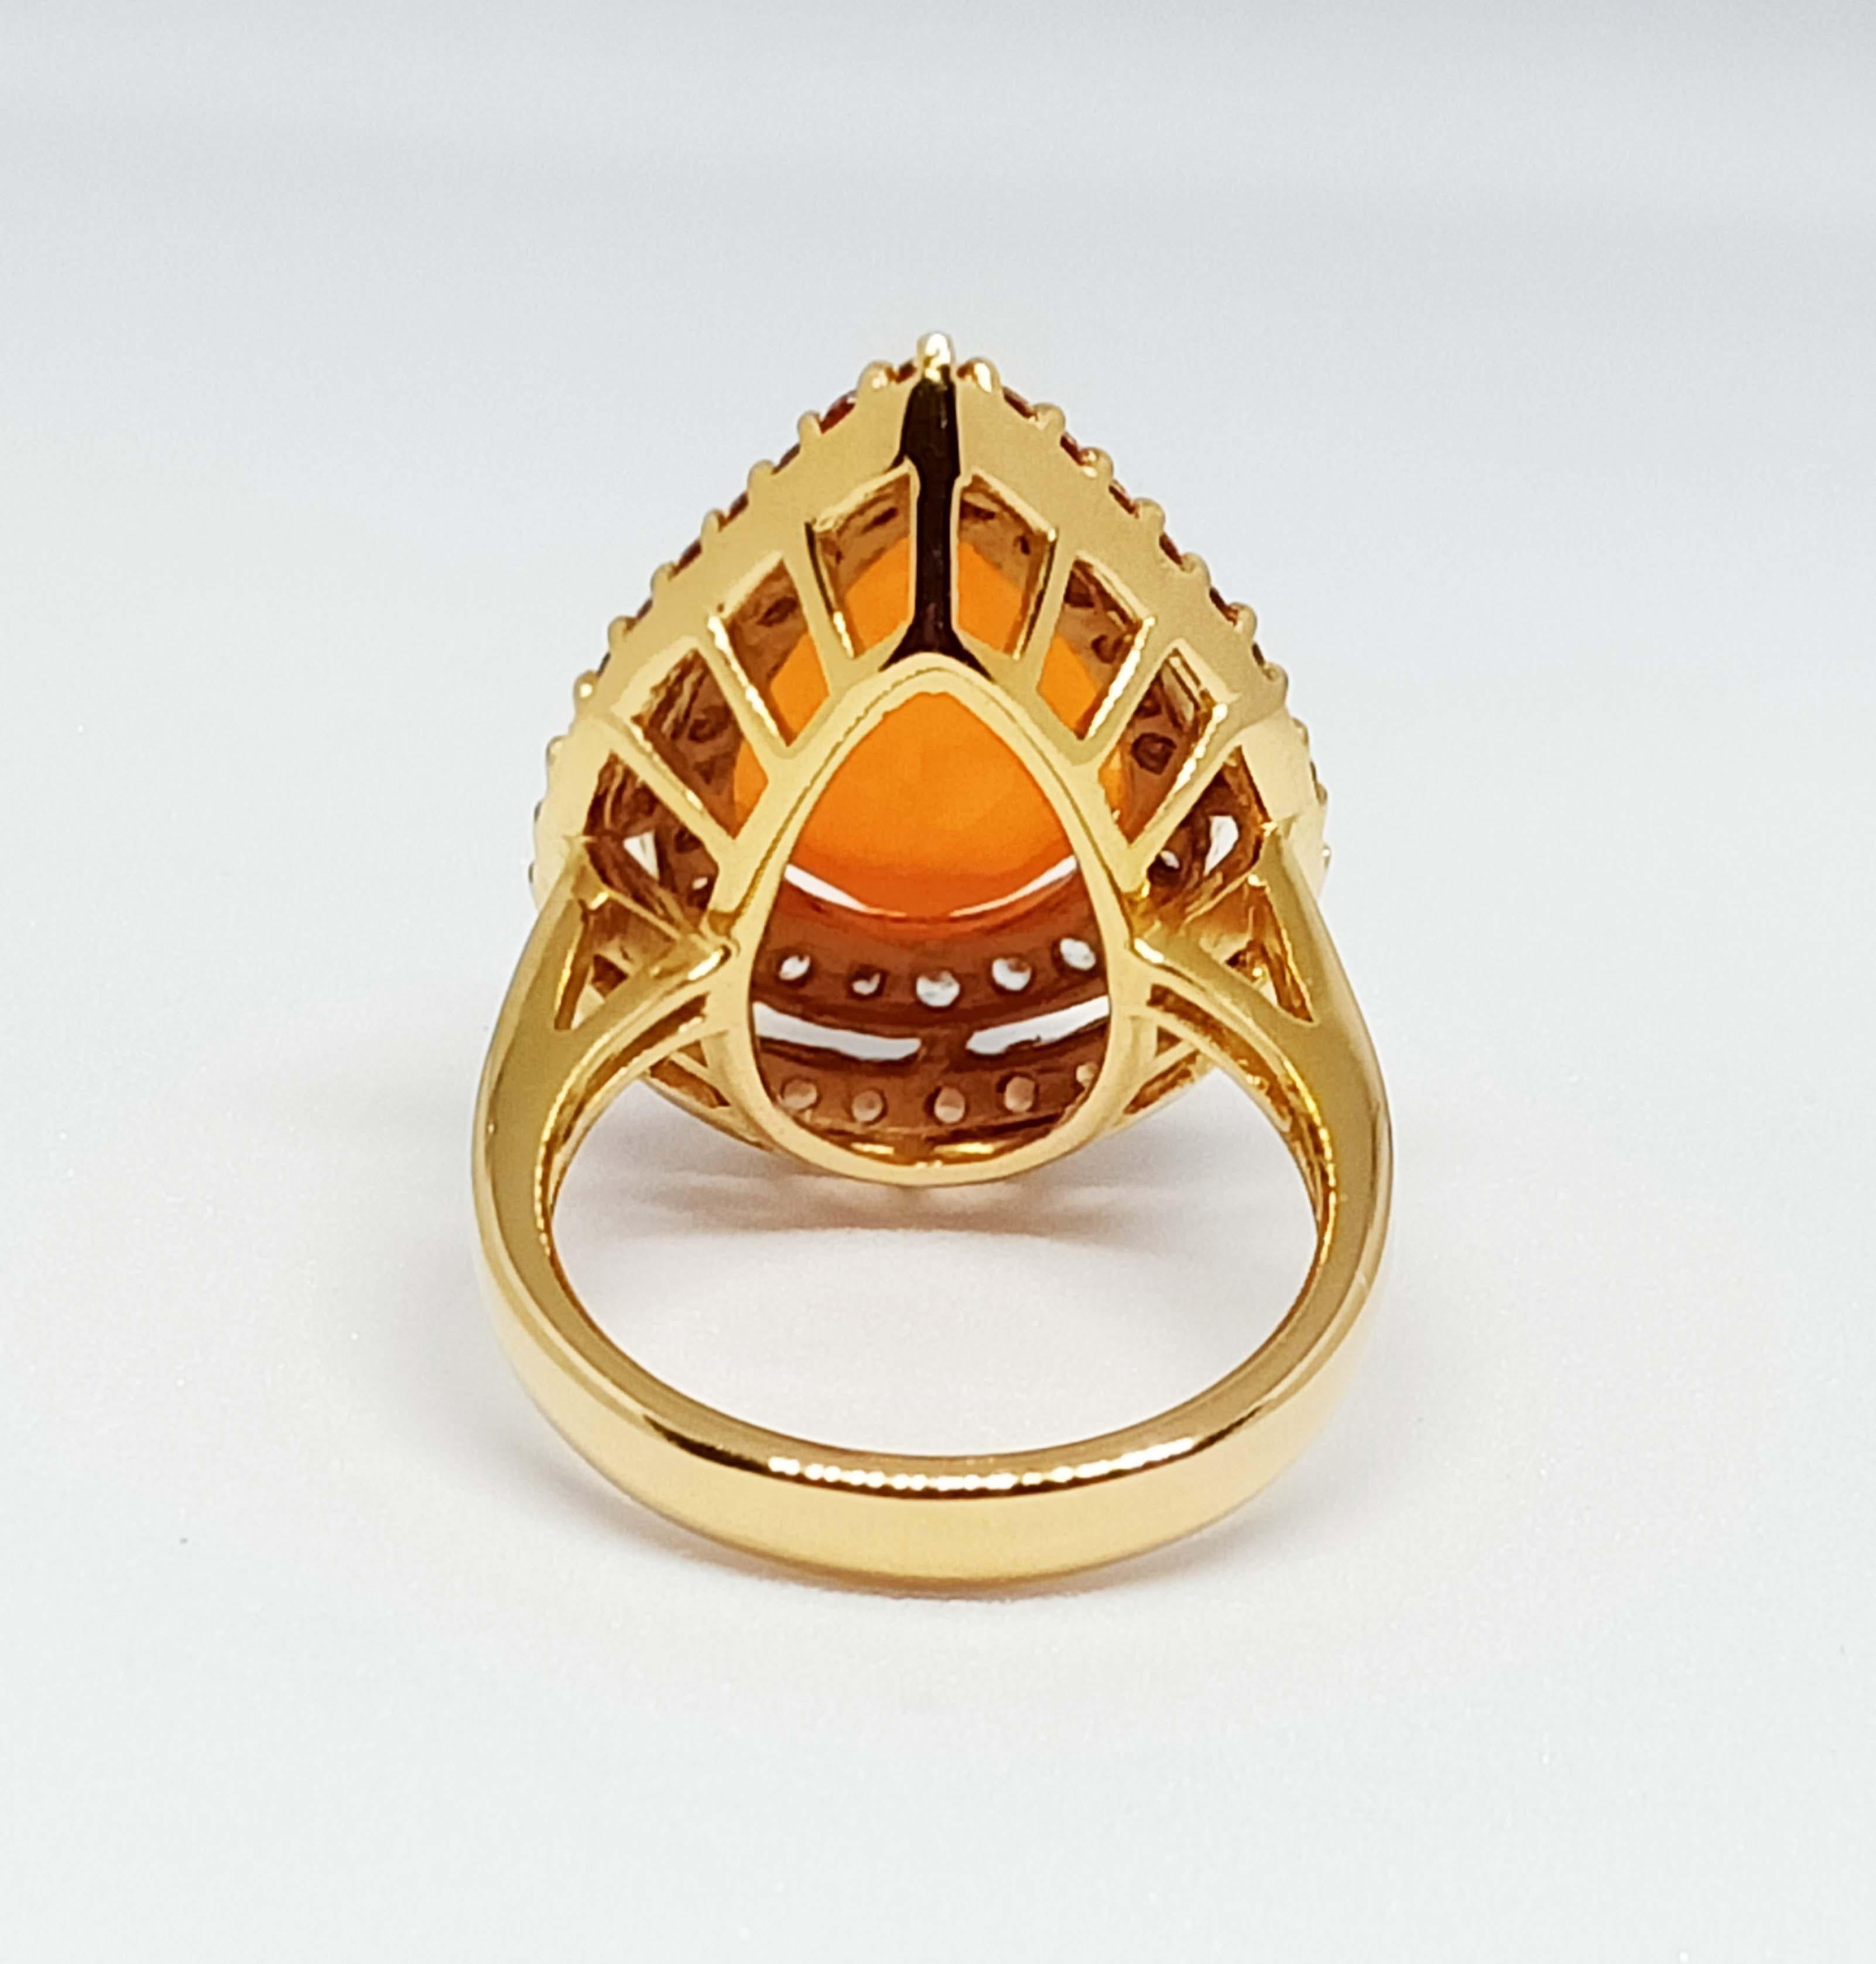 Pear Cut 7.86cts. Orange Opal Ring. Sterling Silver 18k gold Plated. For Sale